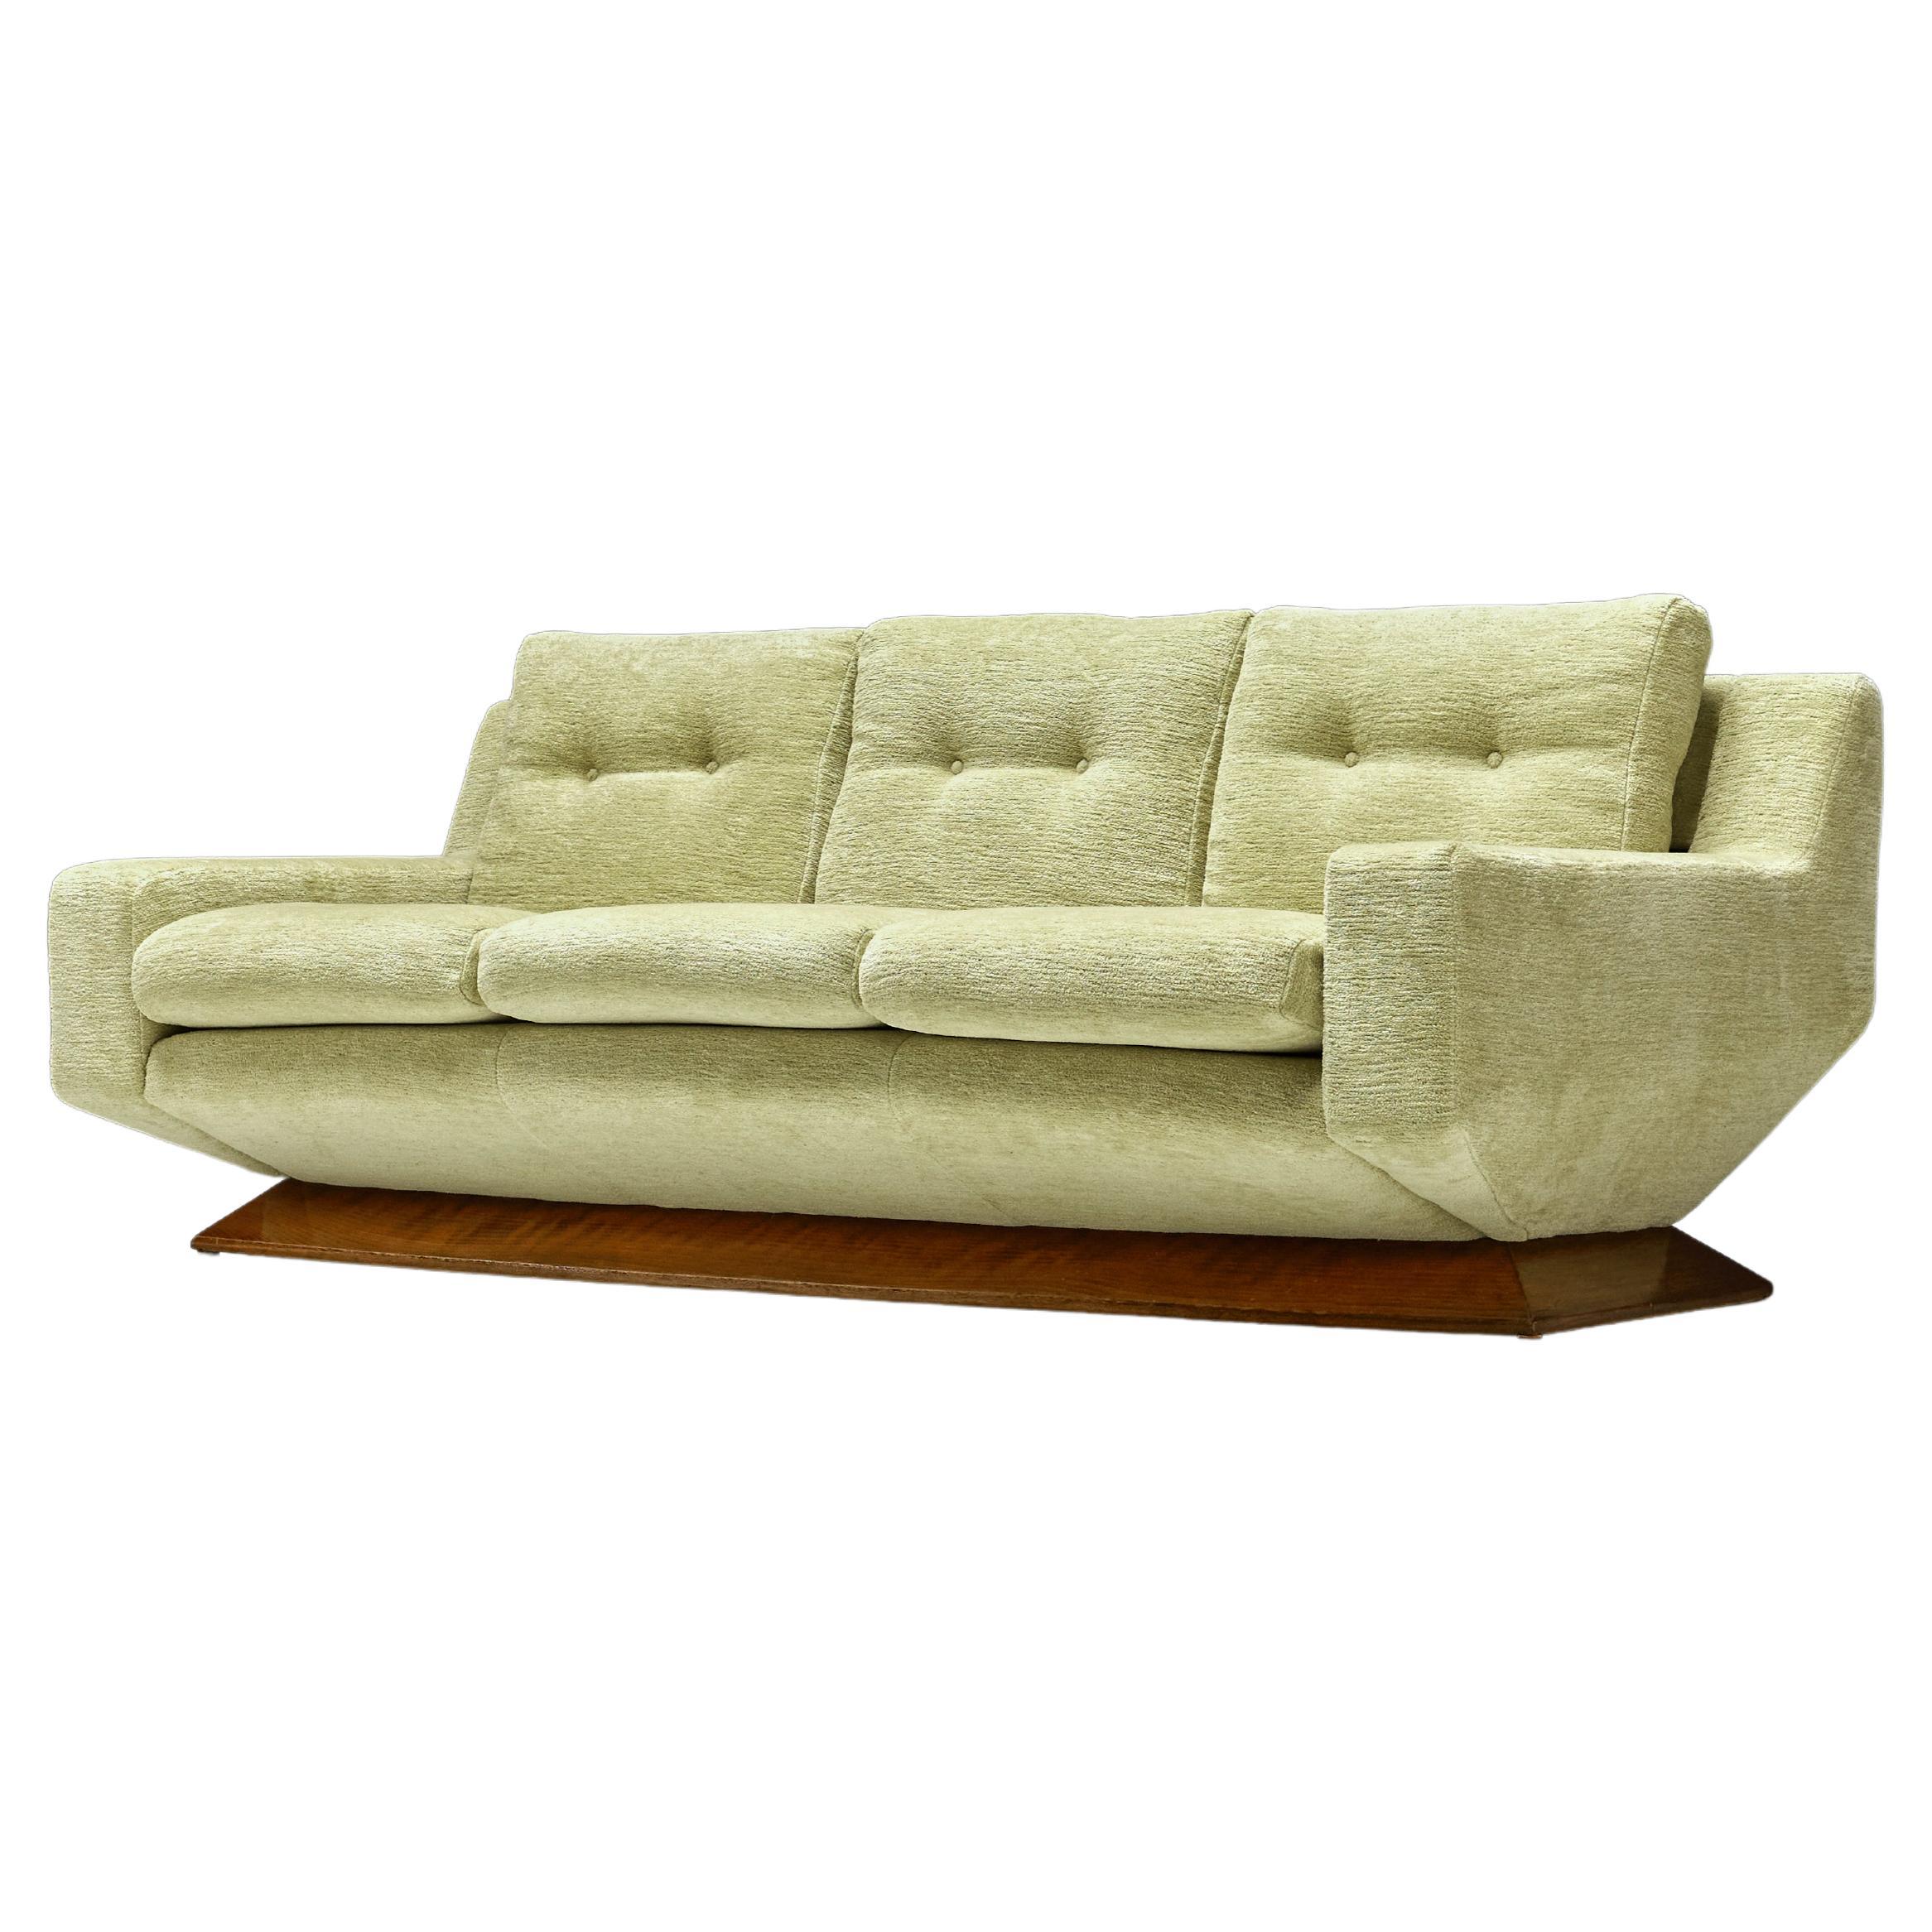 Mid-Century Sofa in Pierre Frey Chenille, Italy, 1960s For Sale